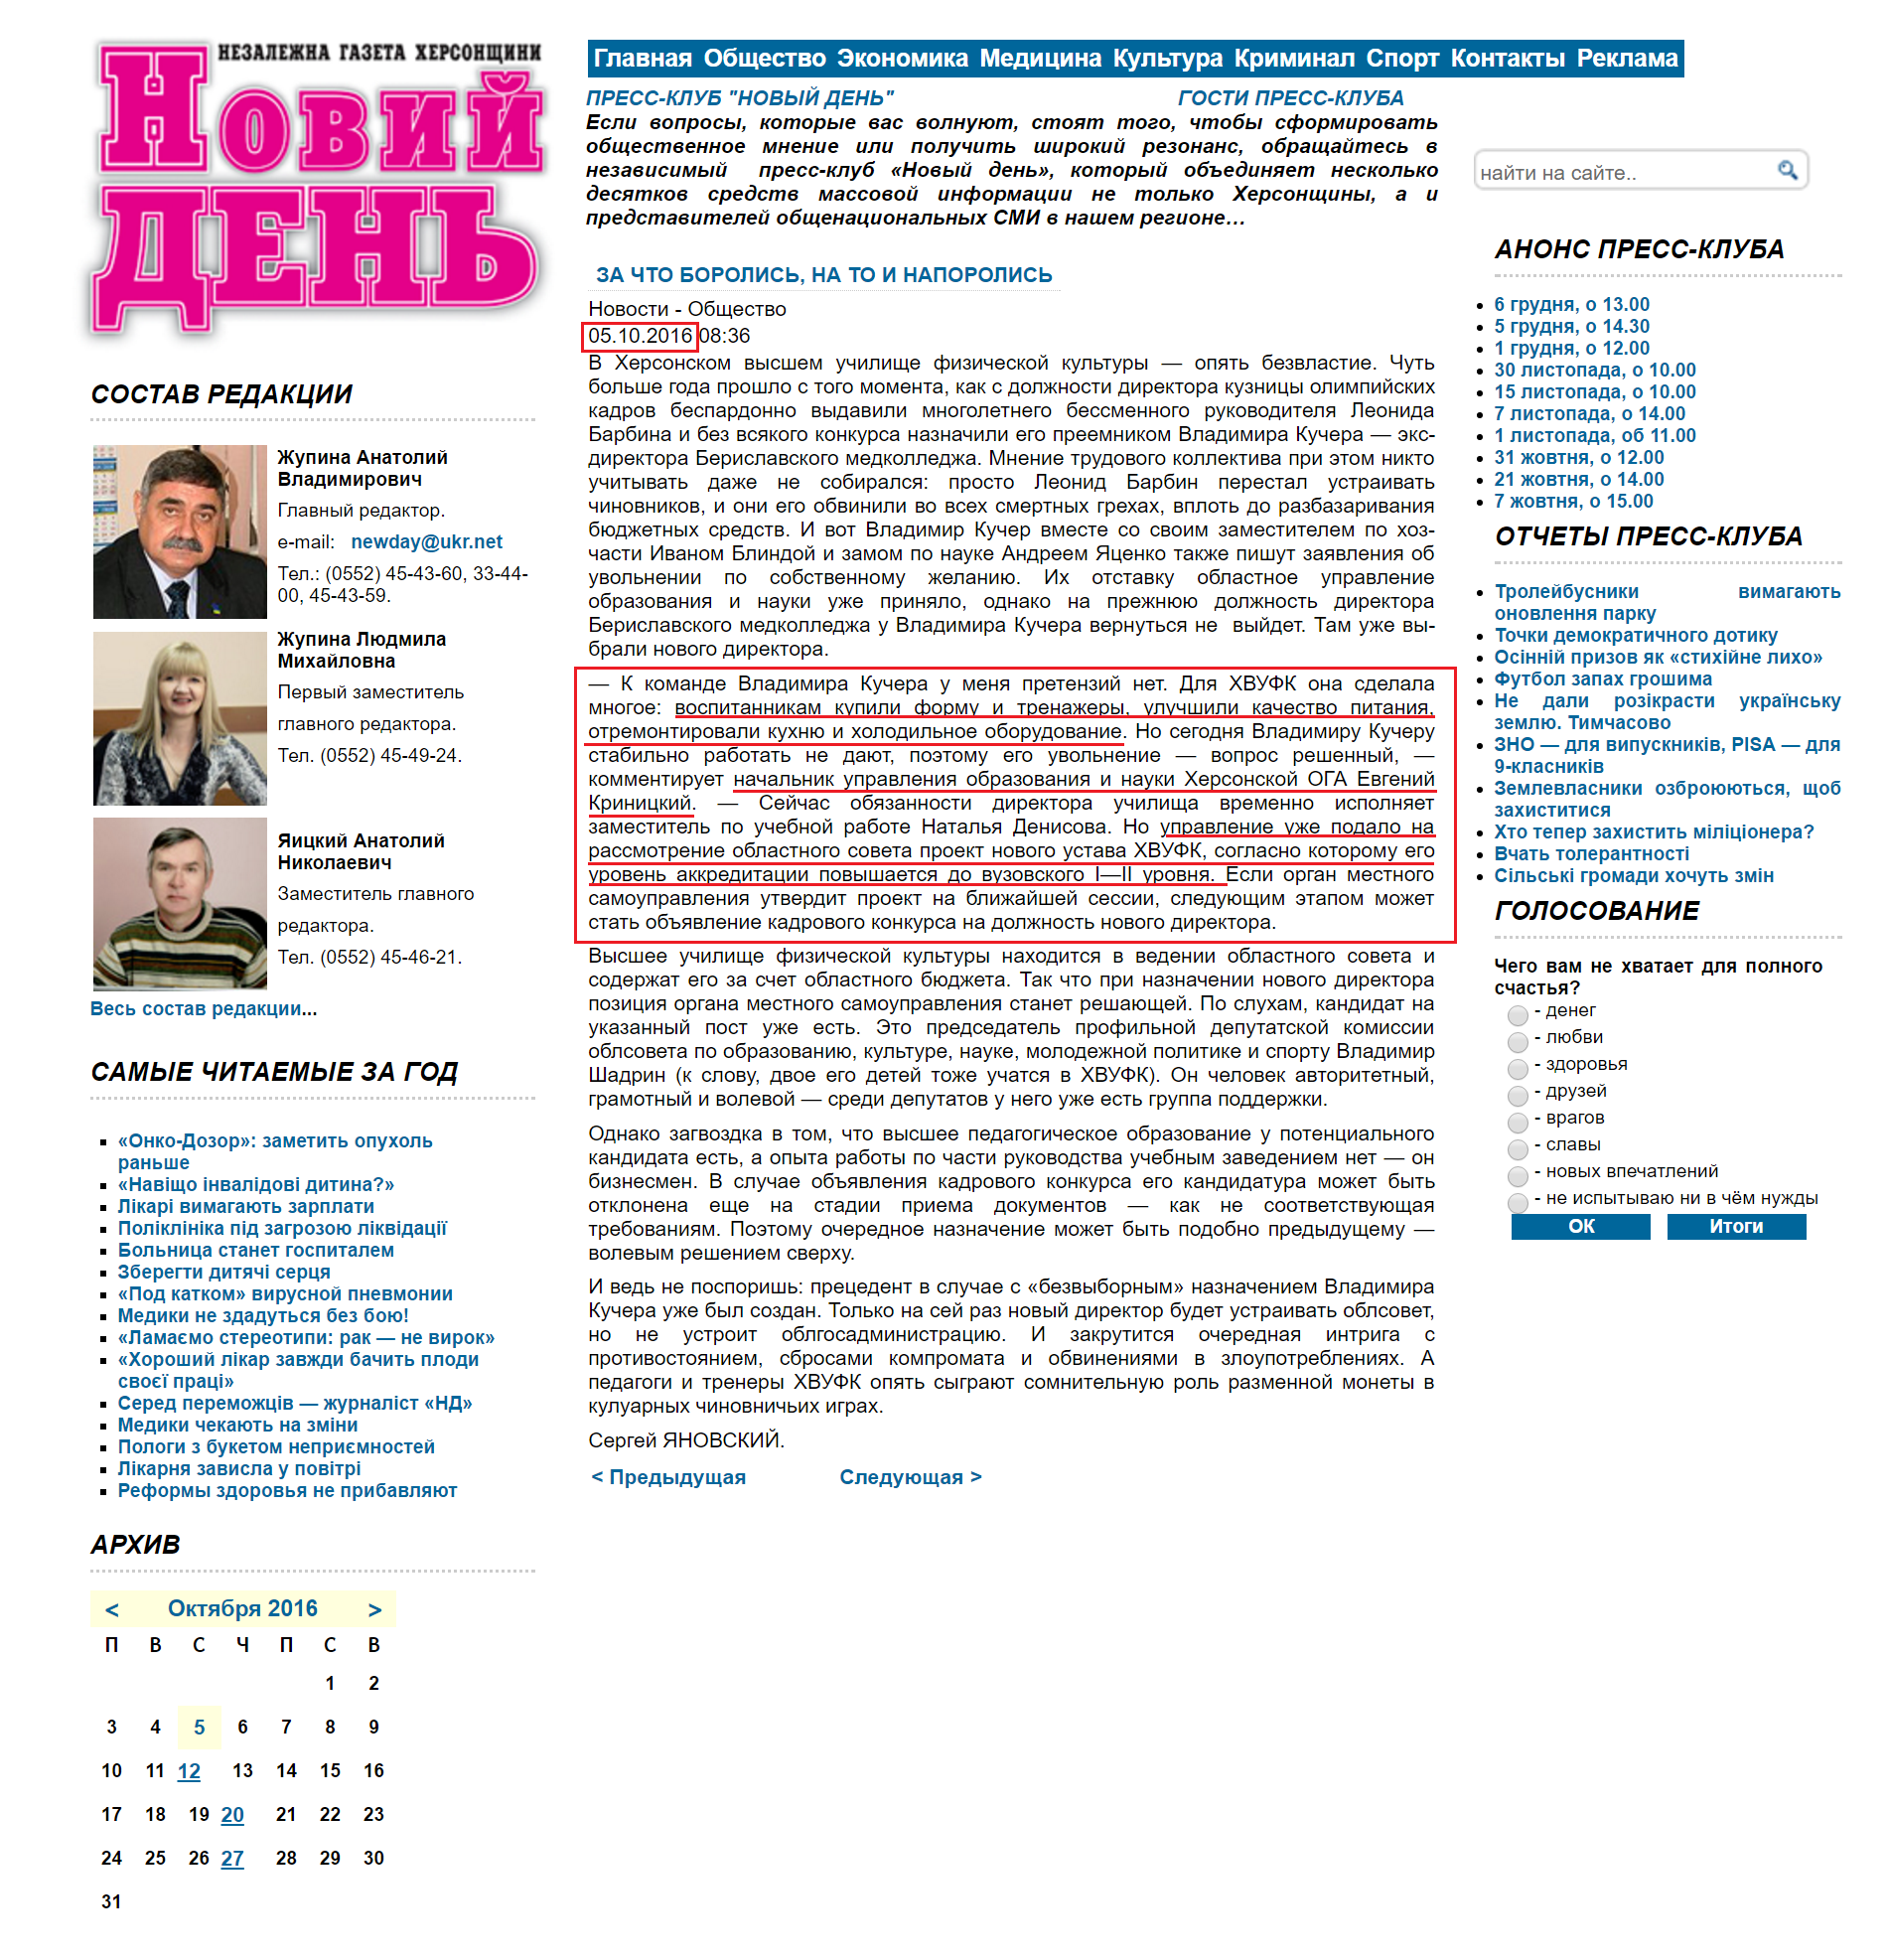 http://www.newday.kherson.ua/index.php/component/content/article/4-obwestvo/3740-2016-10-05-08-36-38.html